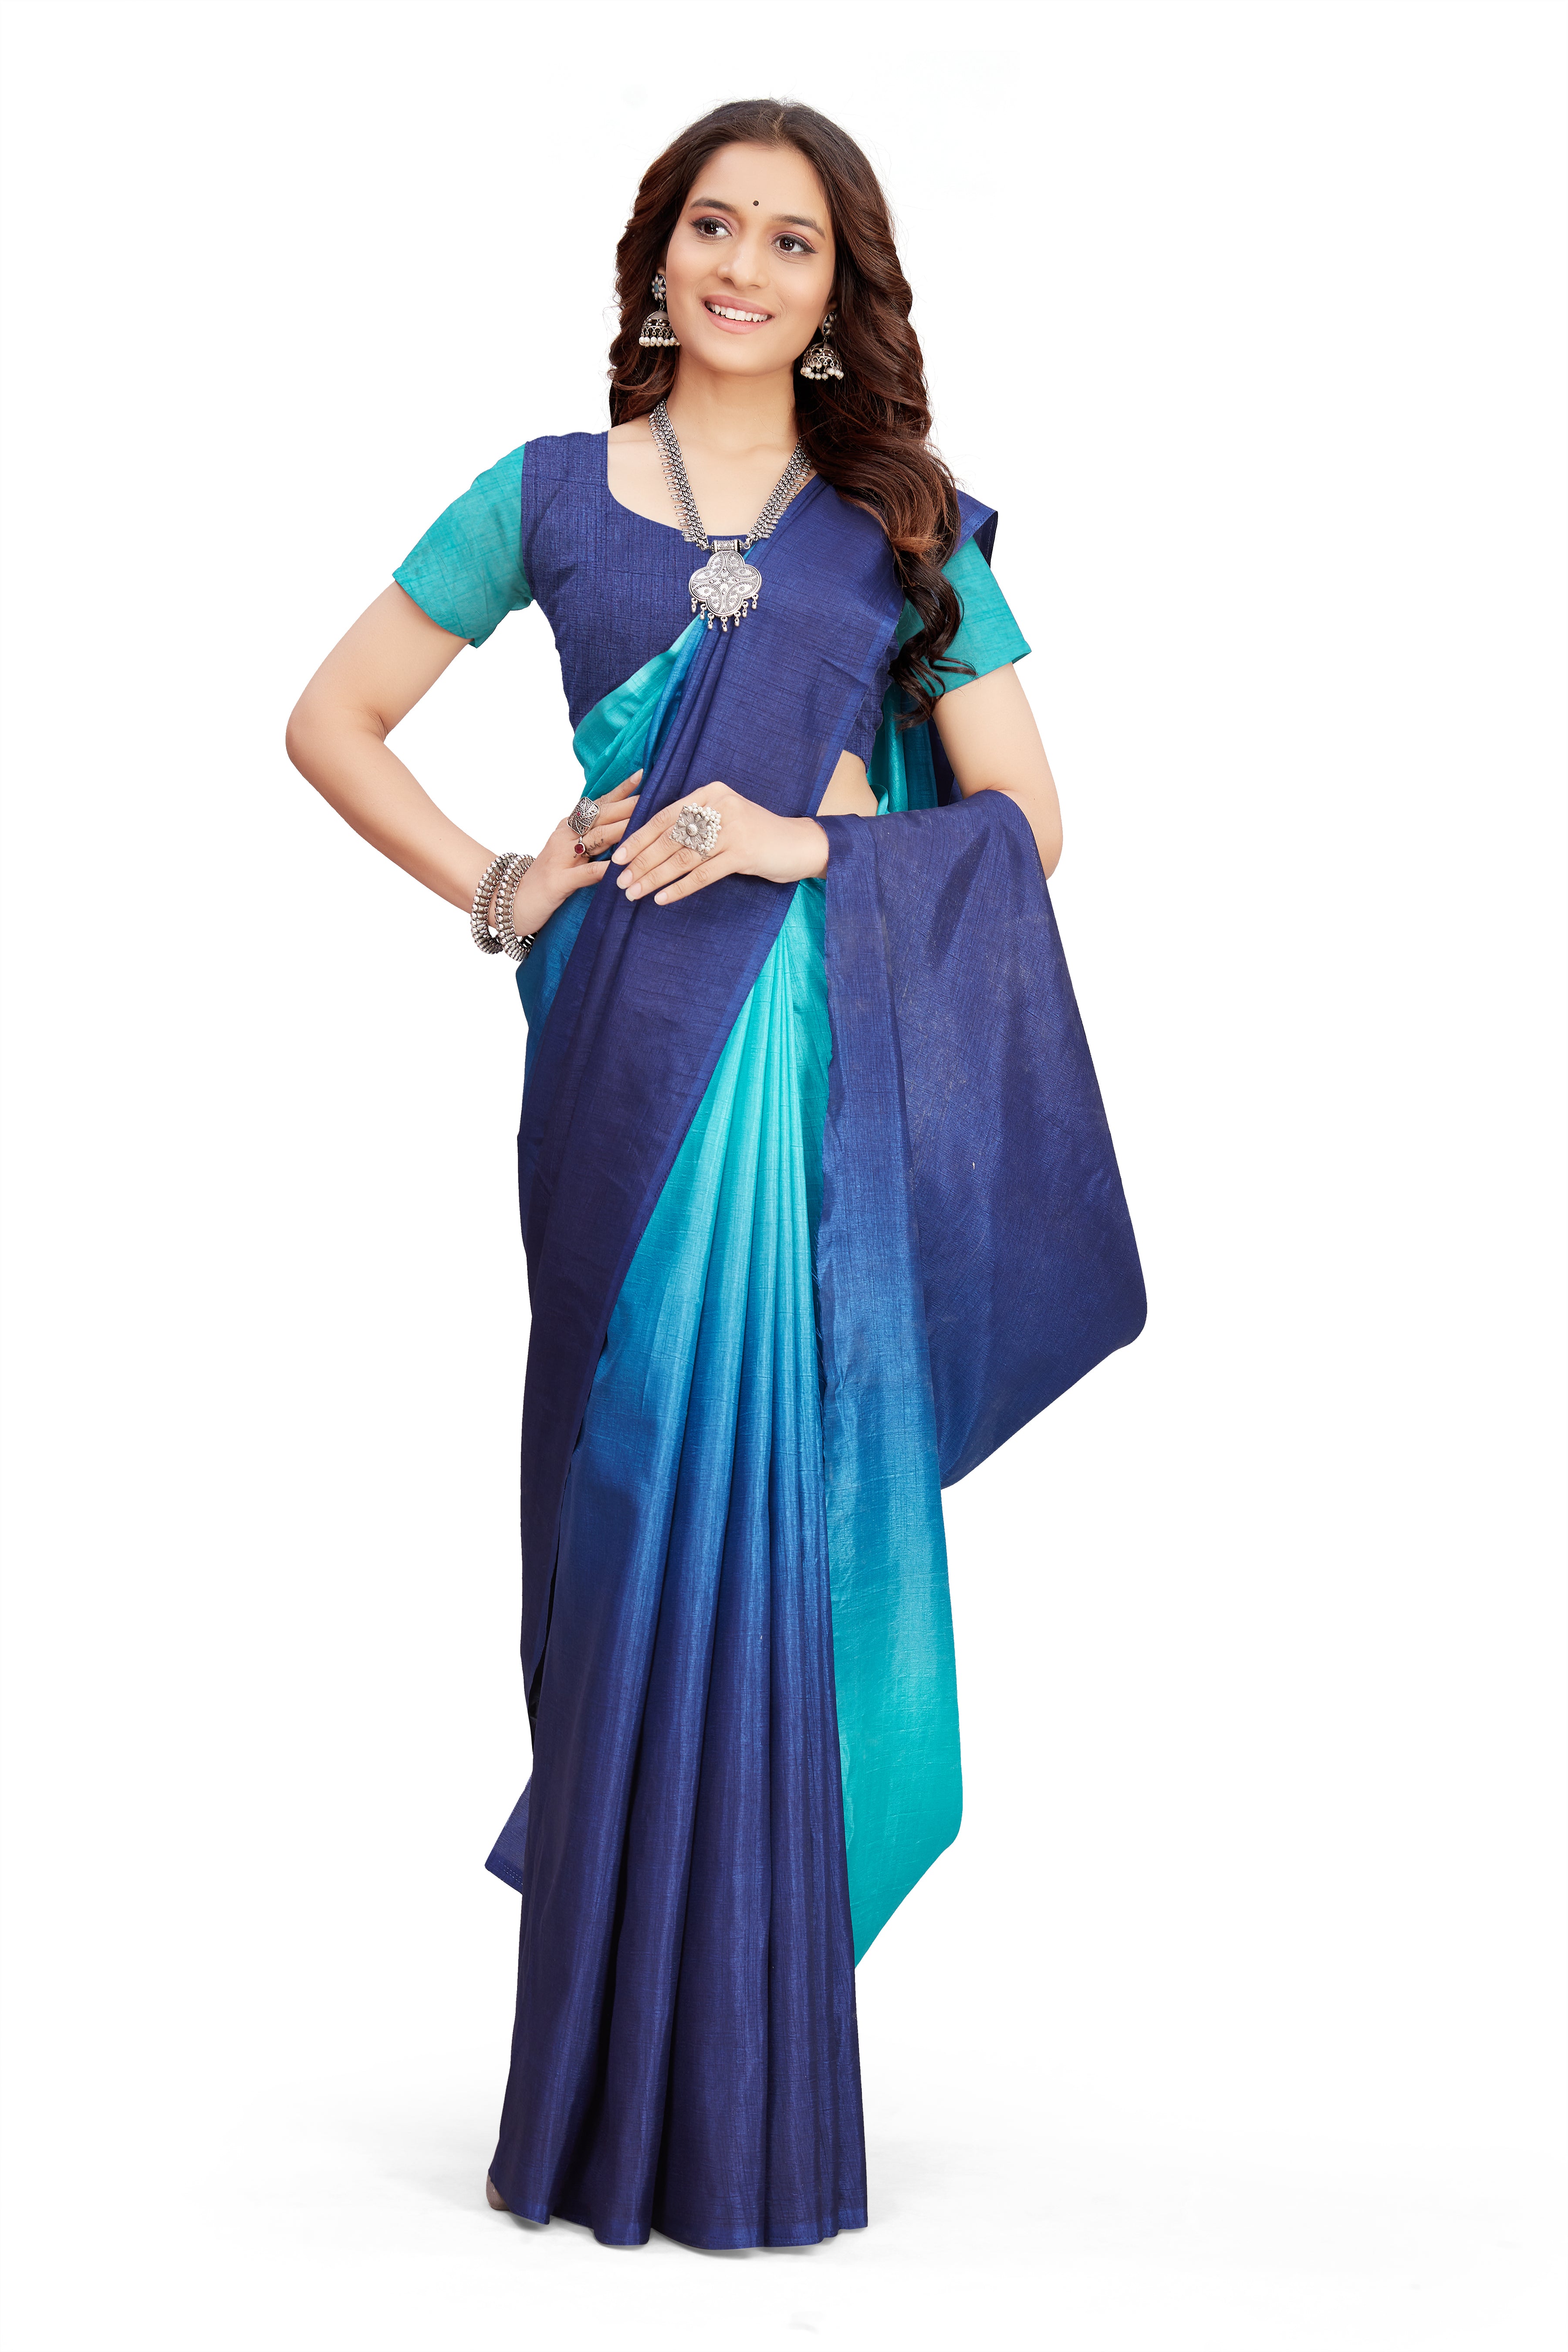 Women's self Woven Solid Textured Dual Shade Festive Wear Silk Blend Sari With Blouse Piece (Royal Blue) - NIMIDHYA